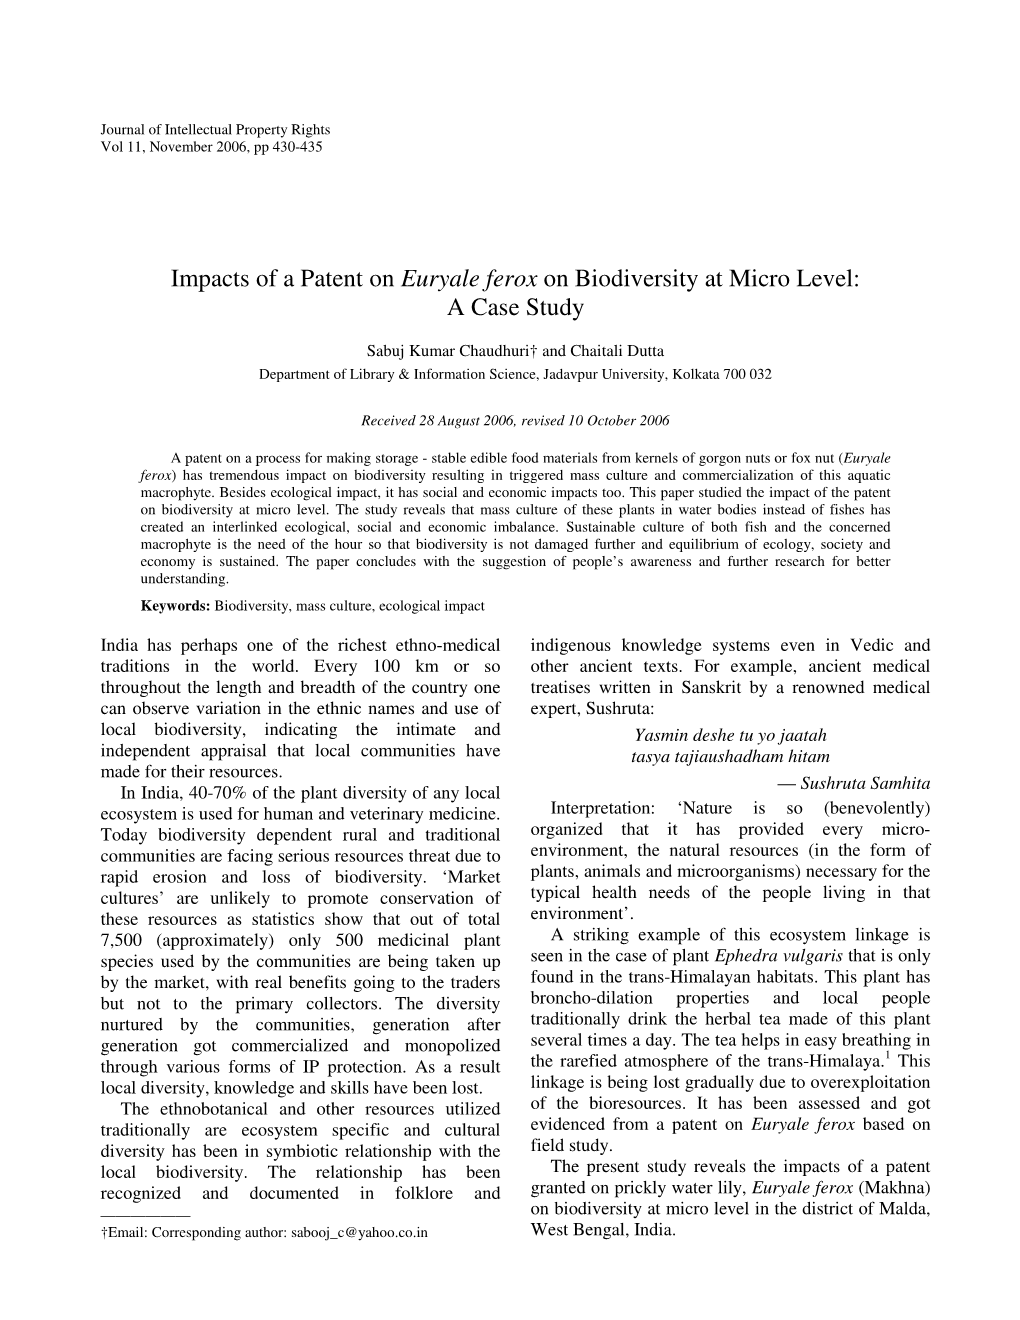 Impacts of a Patent on Euryale Ferox on Biodiversity at Micro Level: a Case Study